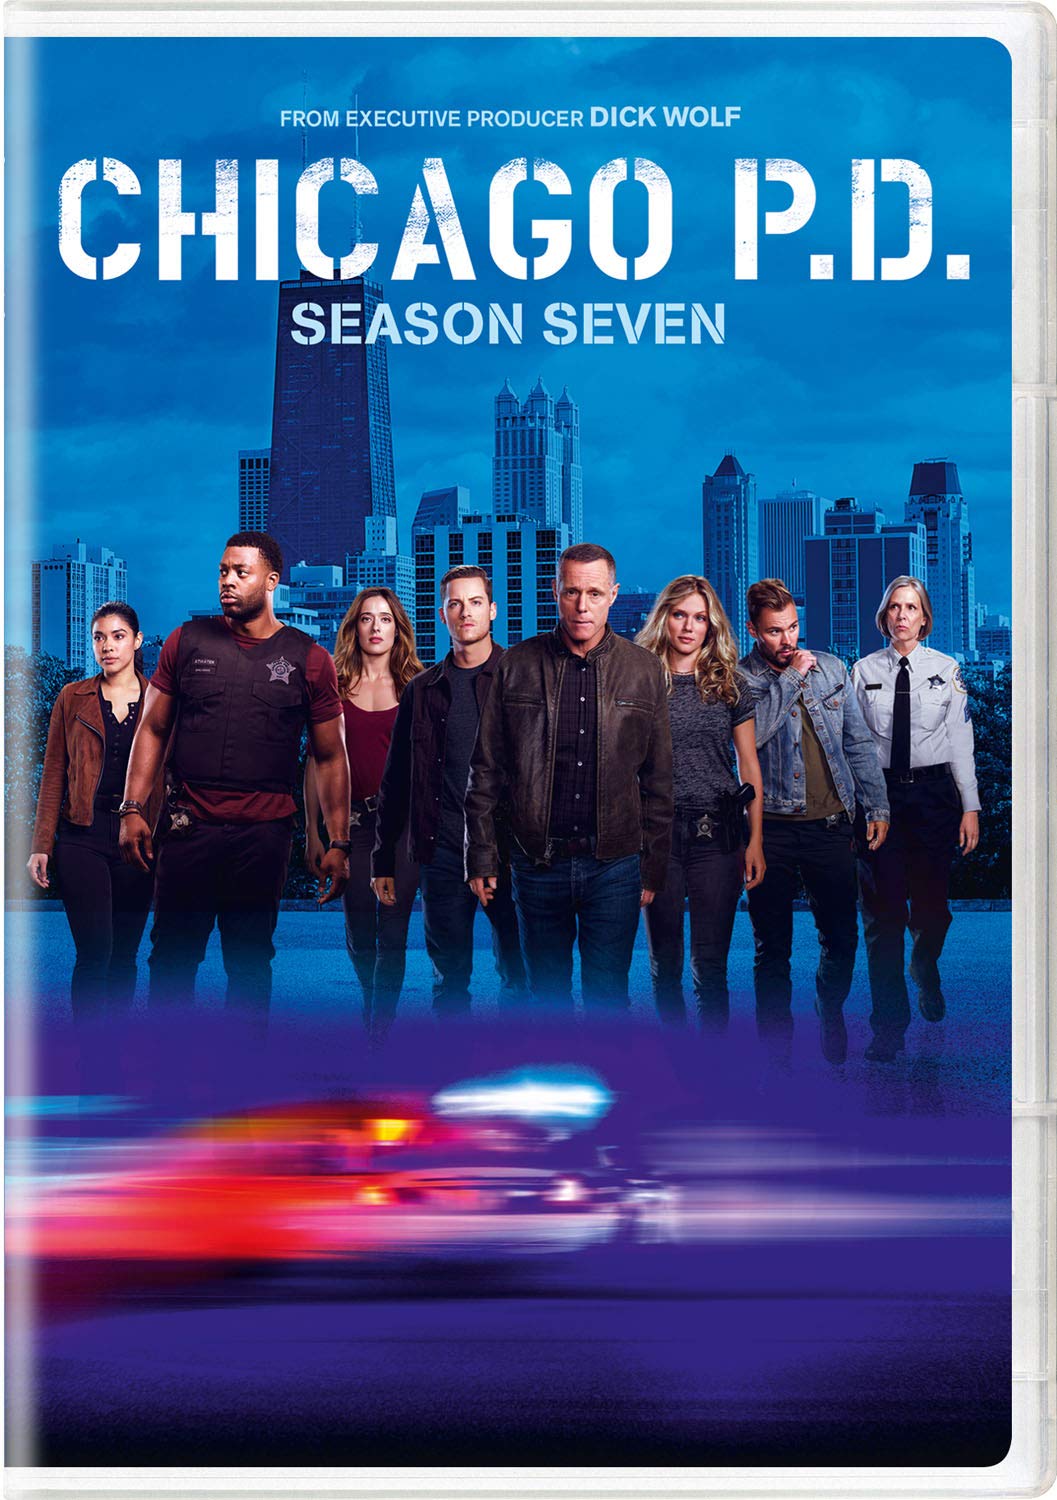 CHICAGO  P.D TV SERIES  POSTER  GLOSSY PAPER  A1 A2 A3 A4 FREE POSTAGE